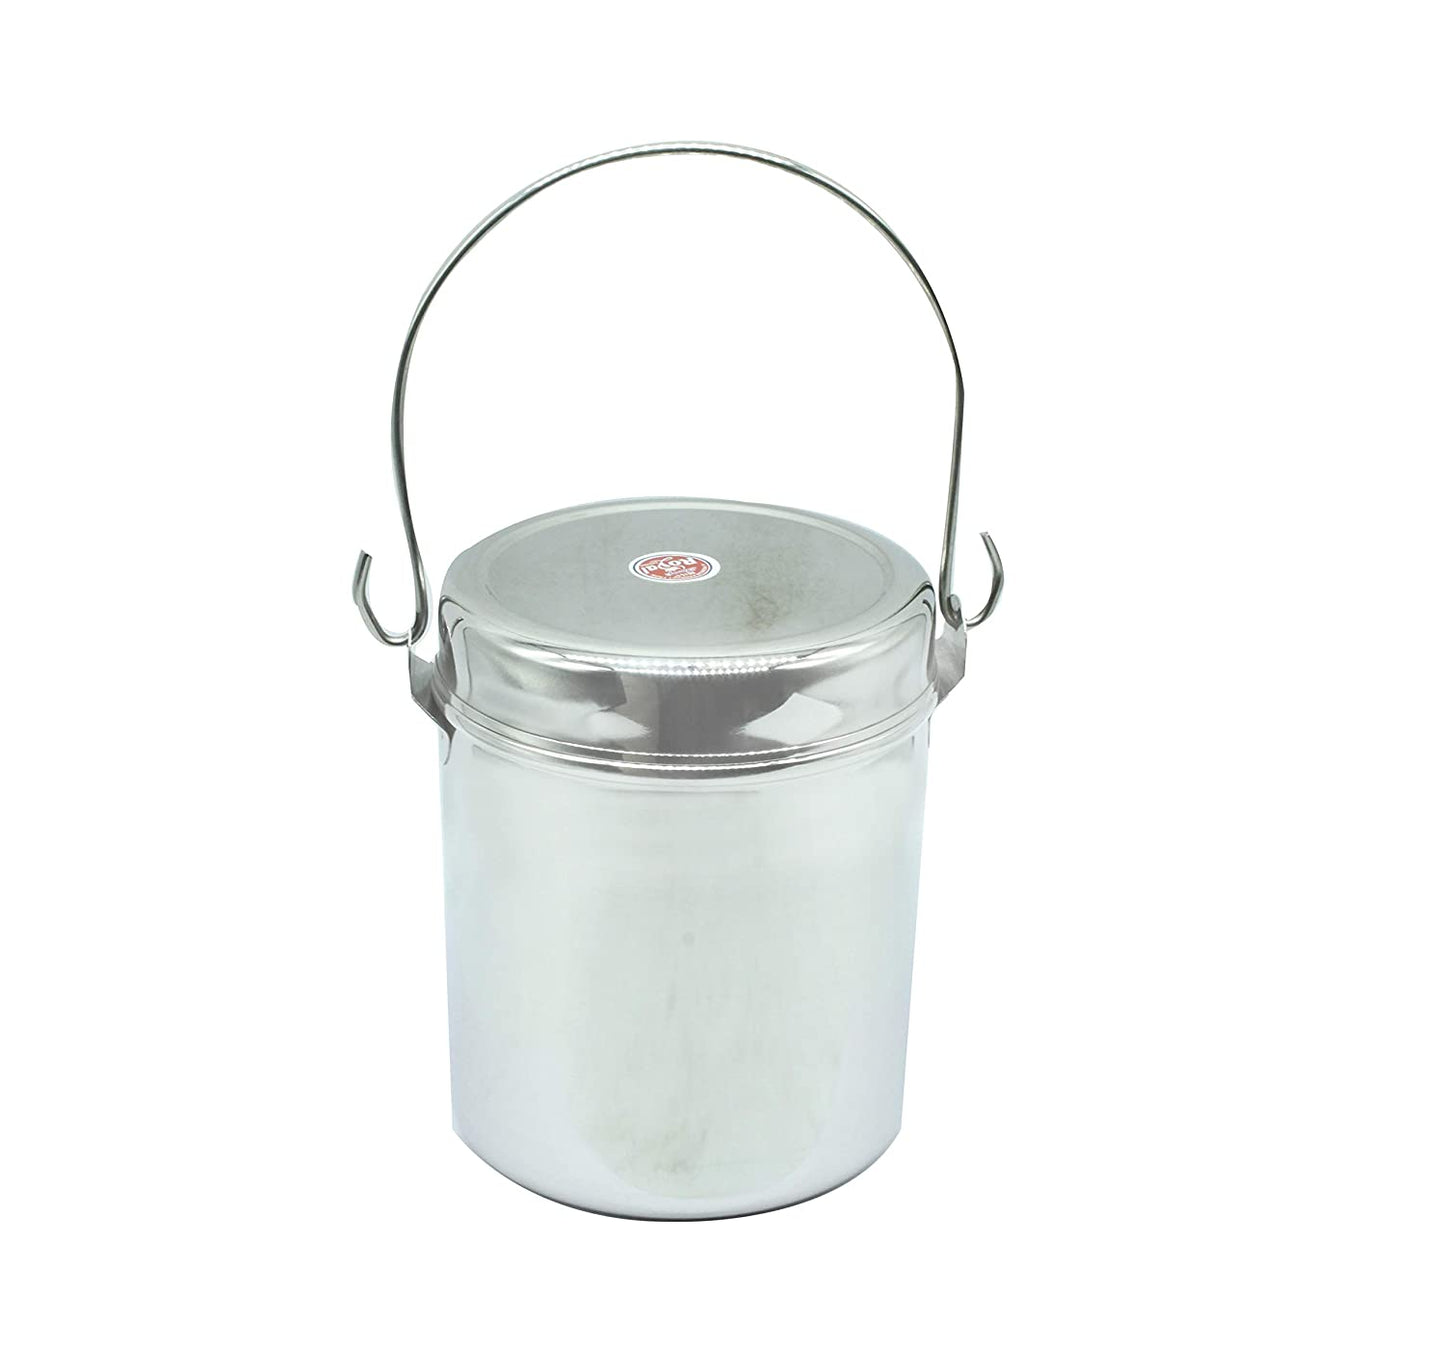 Stainless Steel Royal Milk Pot | Thukku | Container Set Of 2 Pcs (11.5cm & 12.5cm)